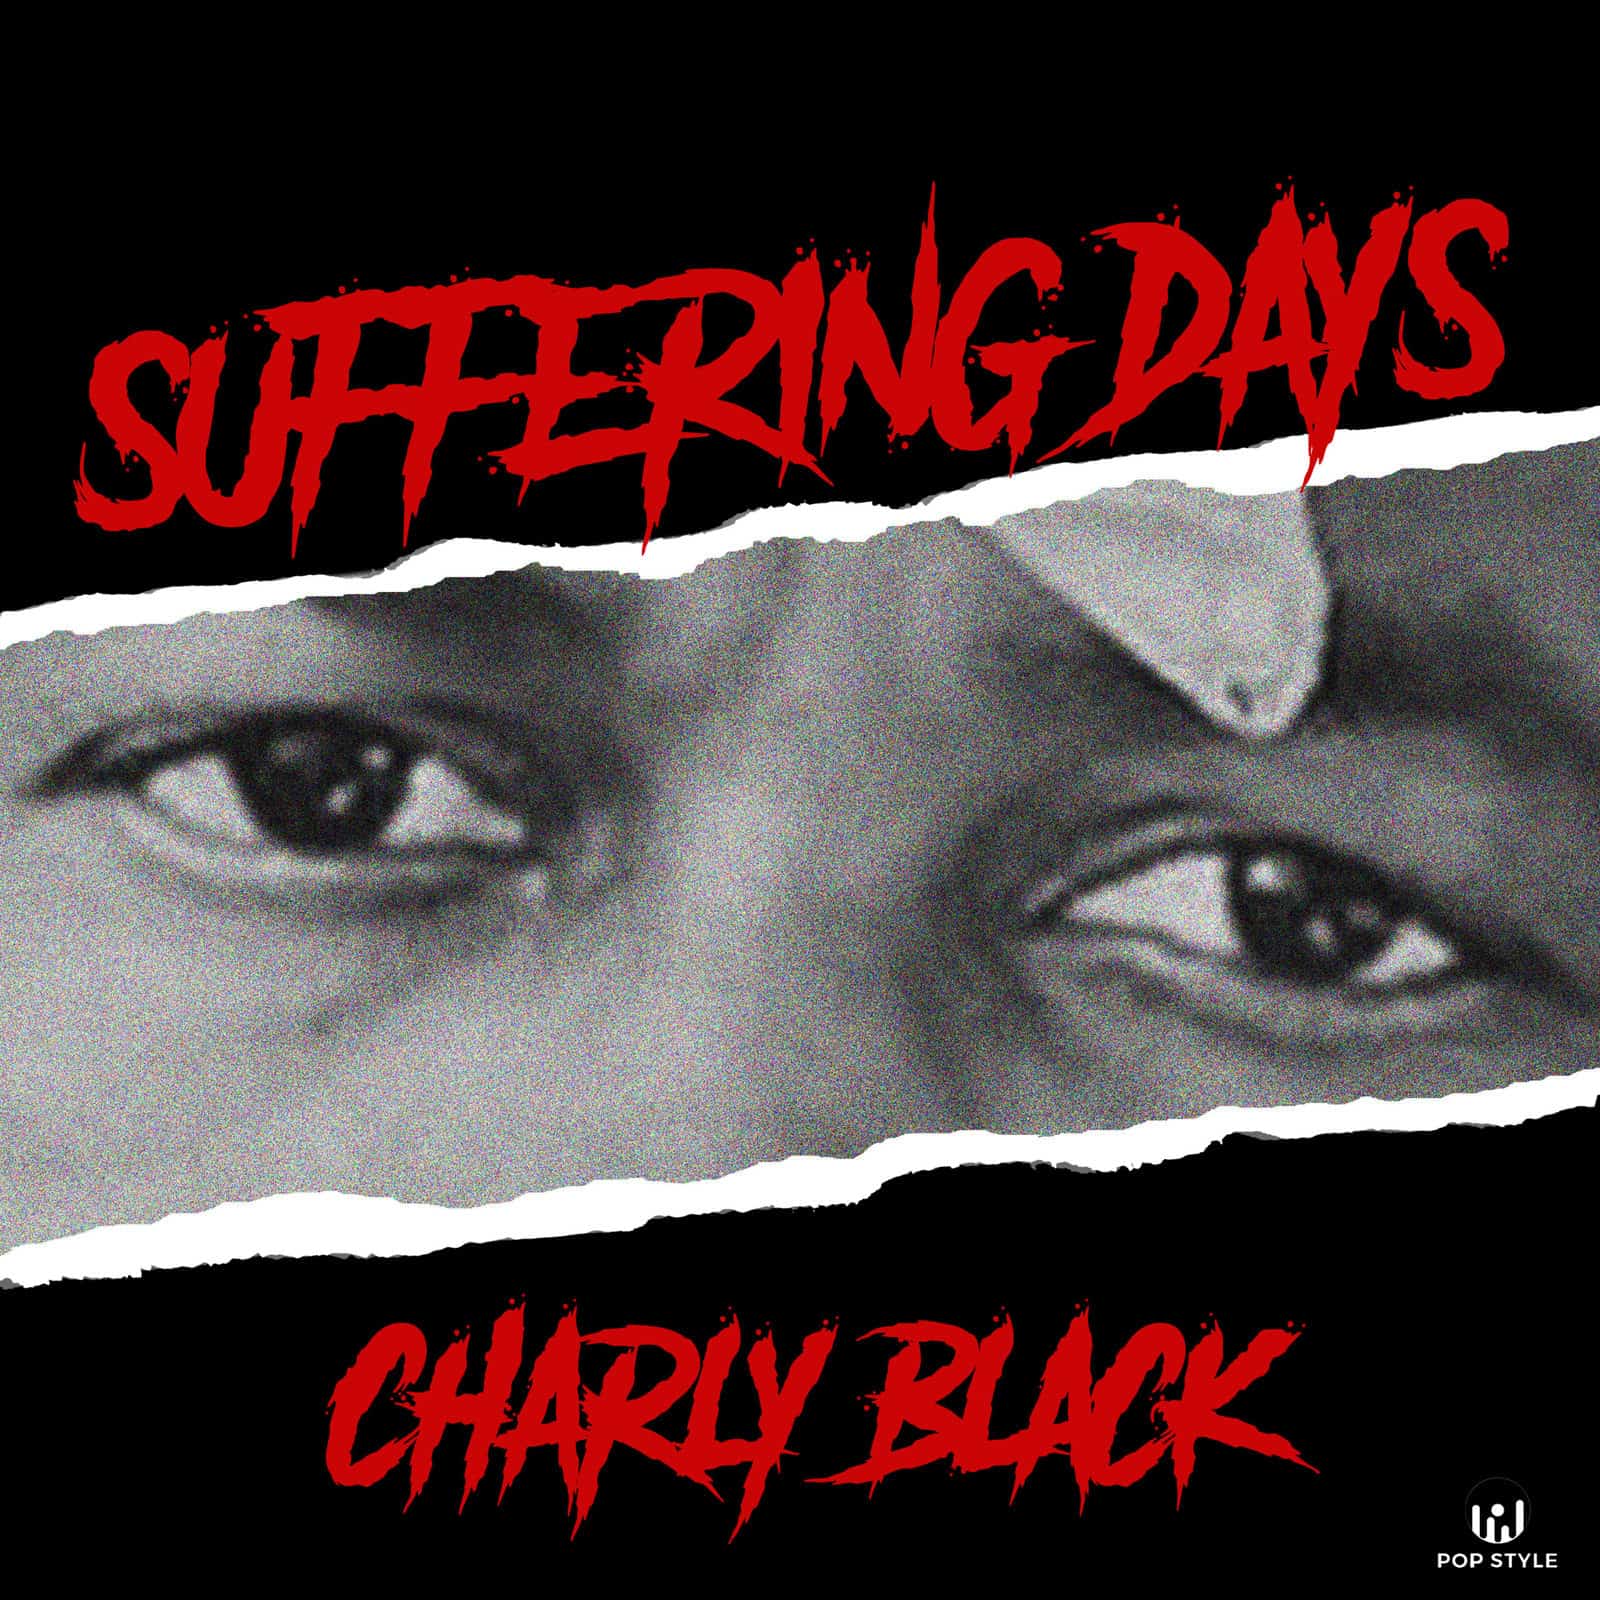 Charly Black - Suffering Days - Pop Style Music